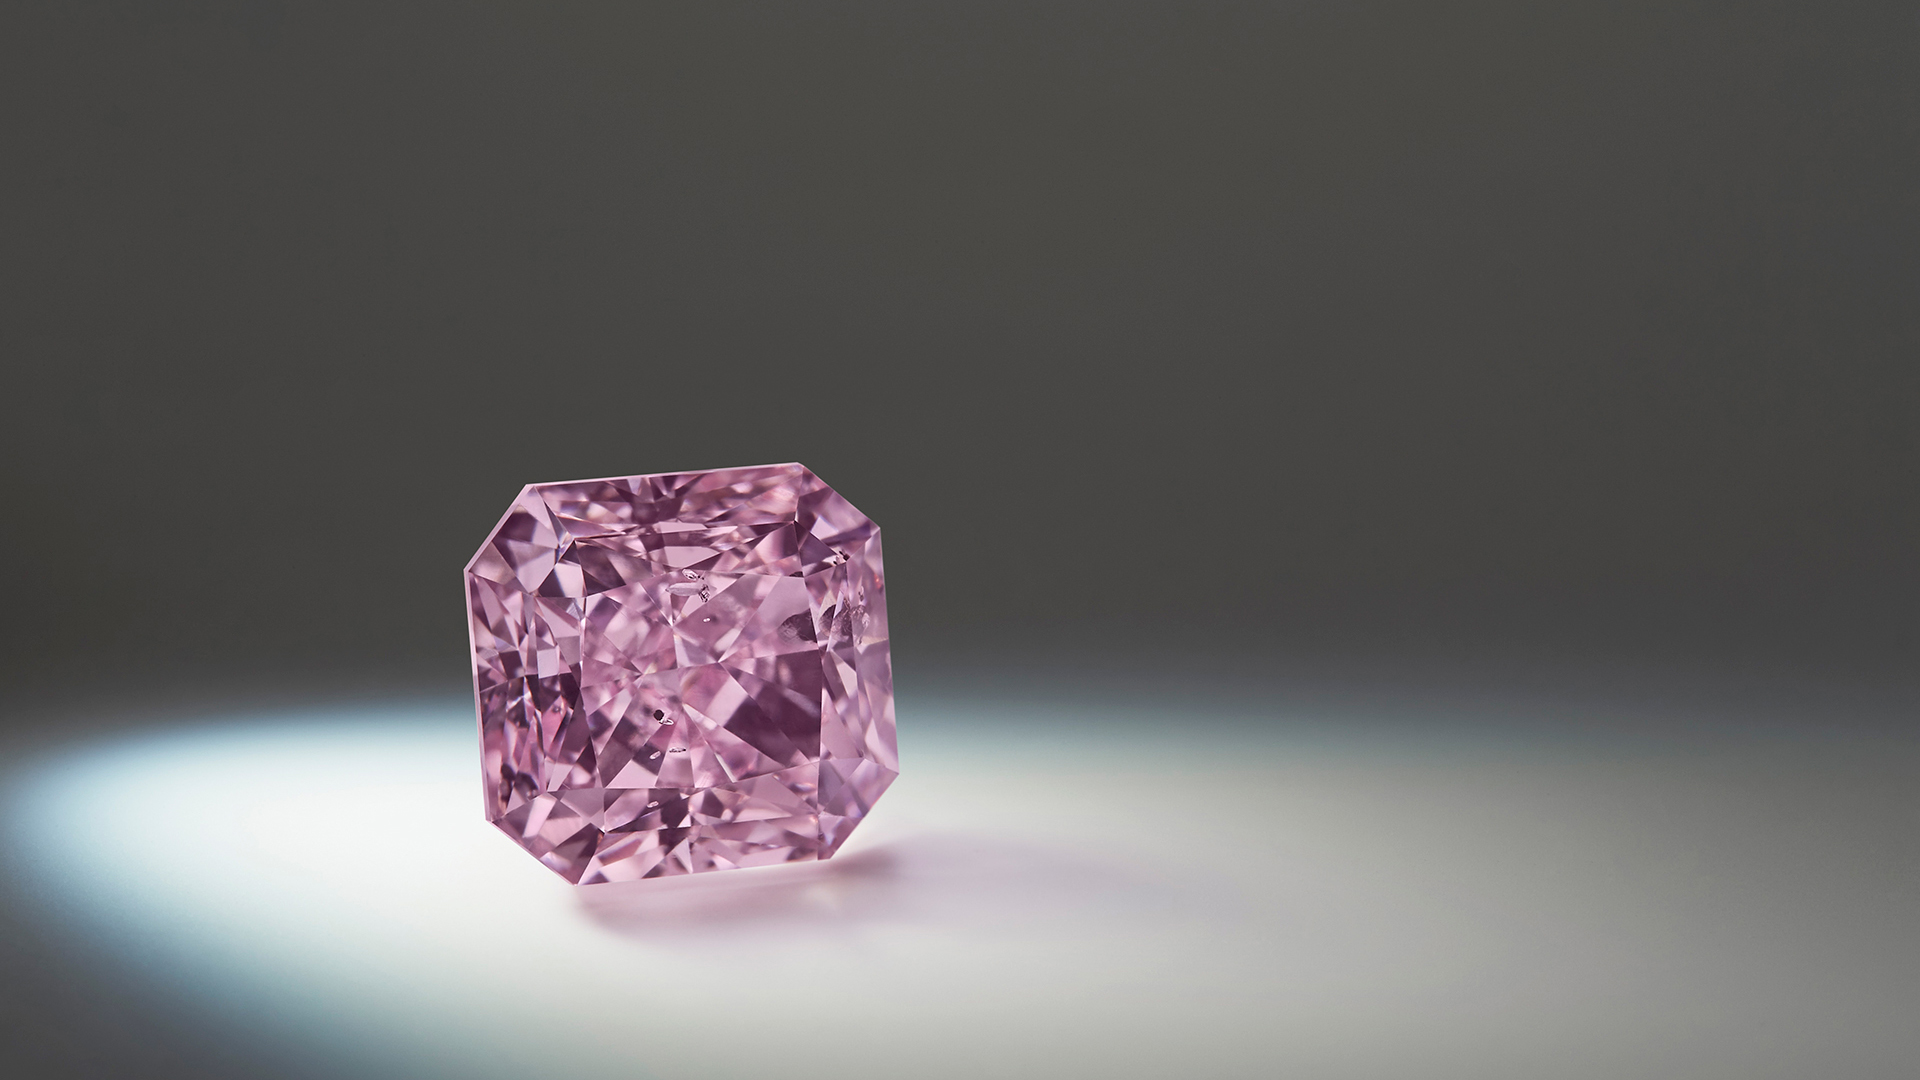 Argyle Ethereal™, a 2.45ct square radiant shaped Fancy Intense Purple-Pink diamond from the 2020 APD Tender.